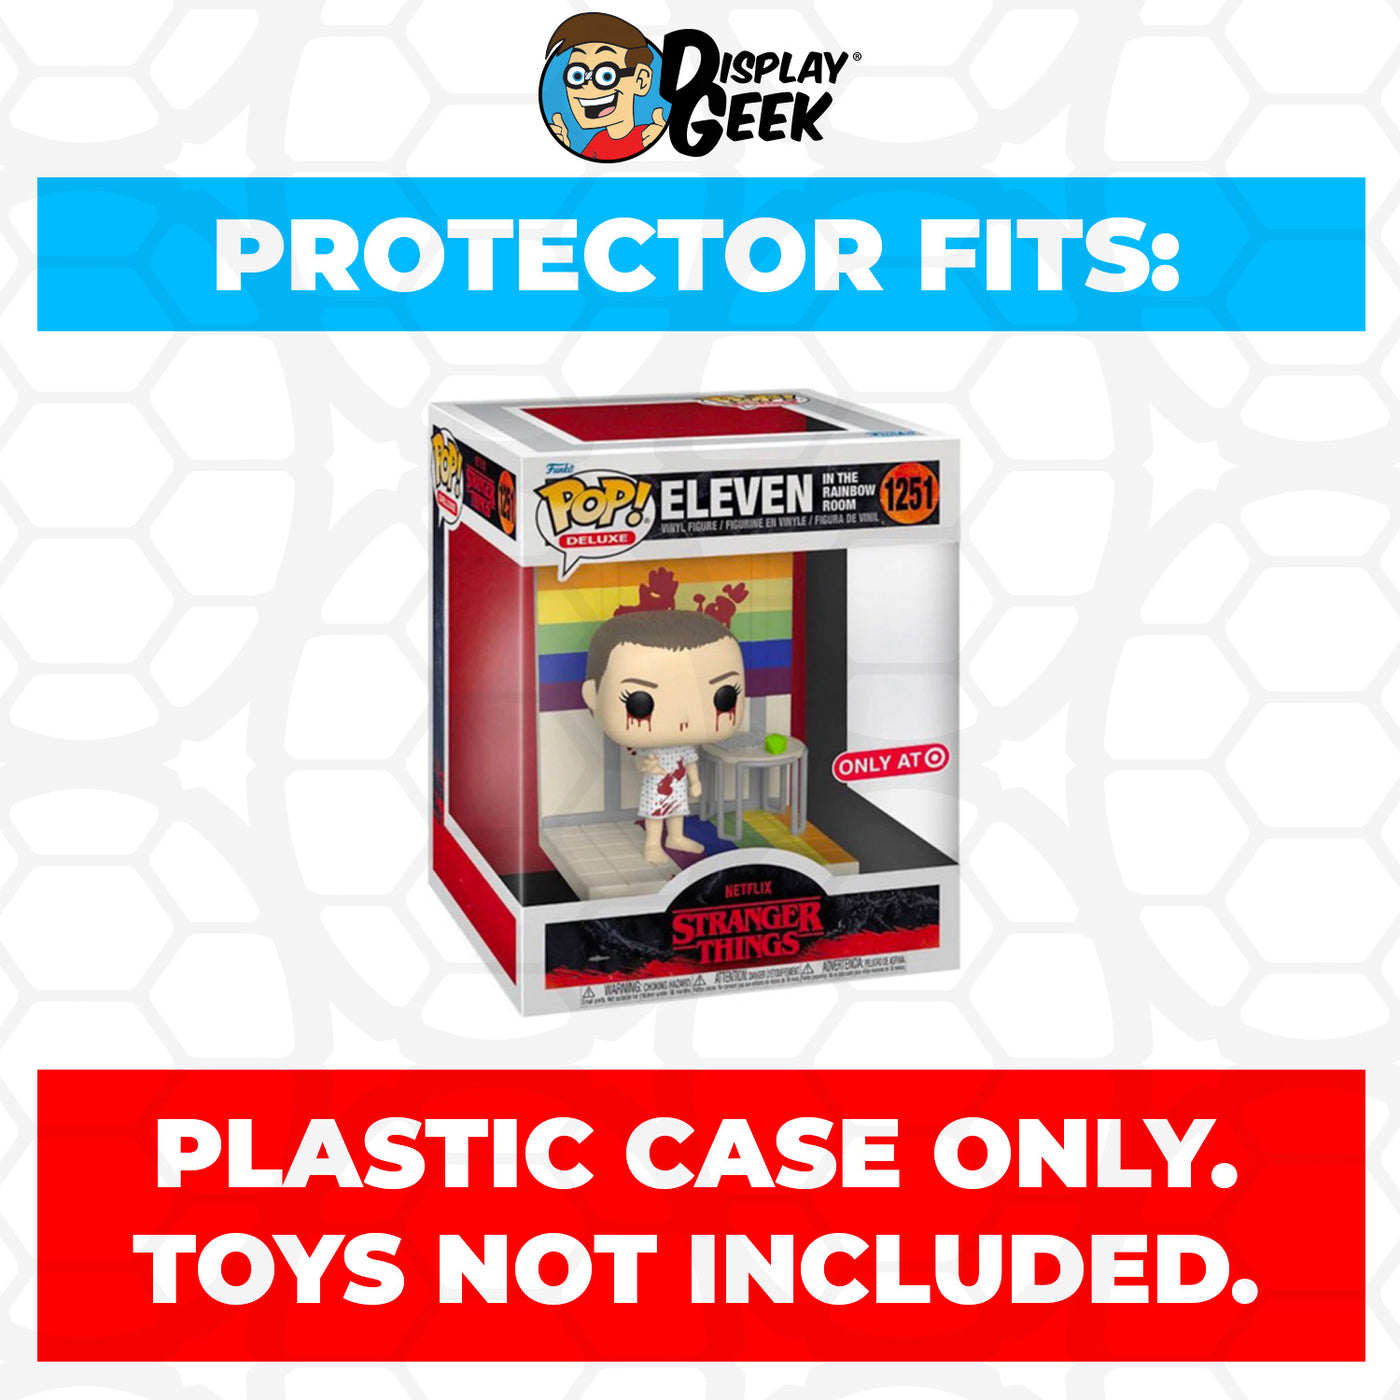 Pop Protector for Eleven in the Rainbow Room #1251 Funko Pop Deluxe on The Protector Guide App by Display Geek